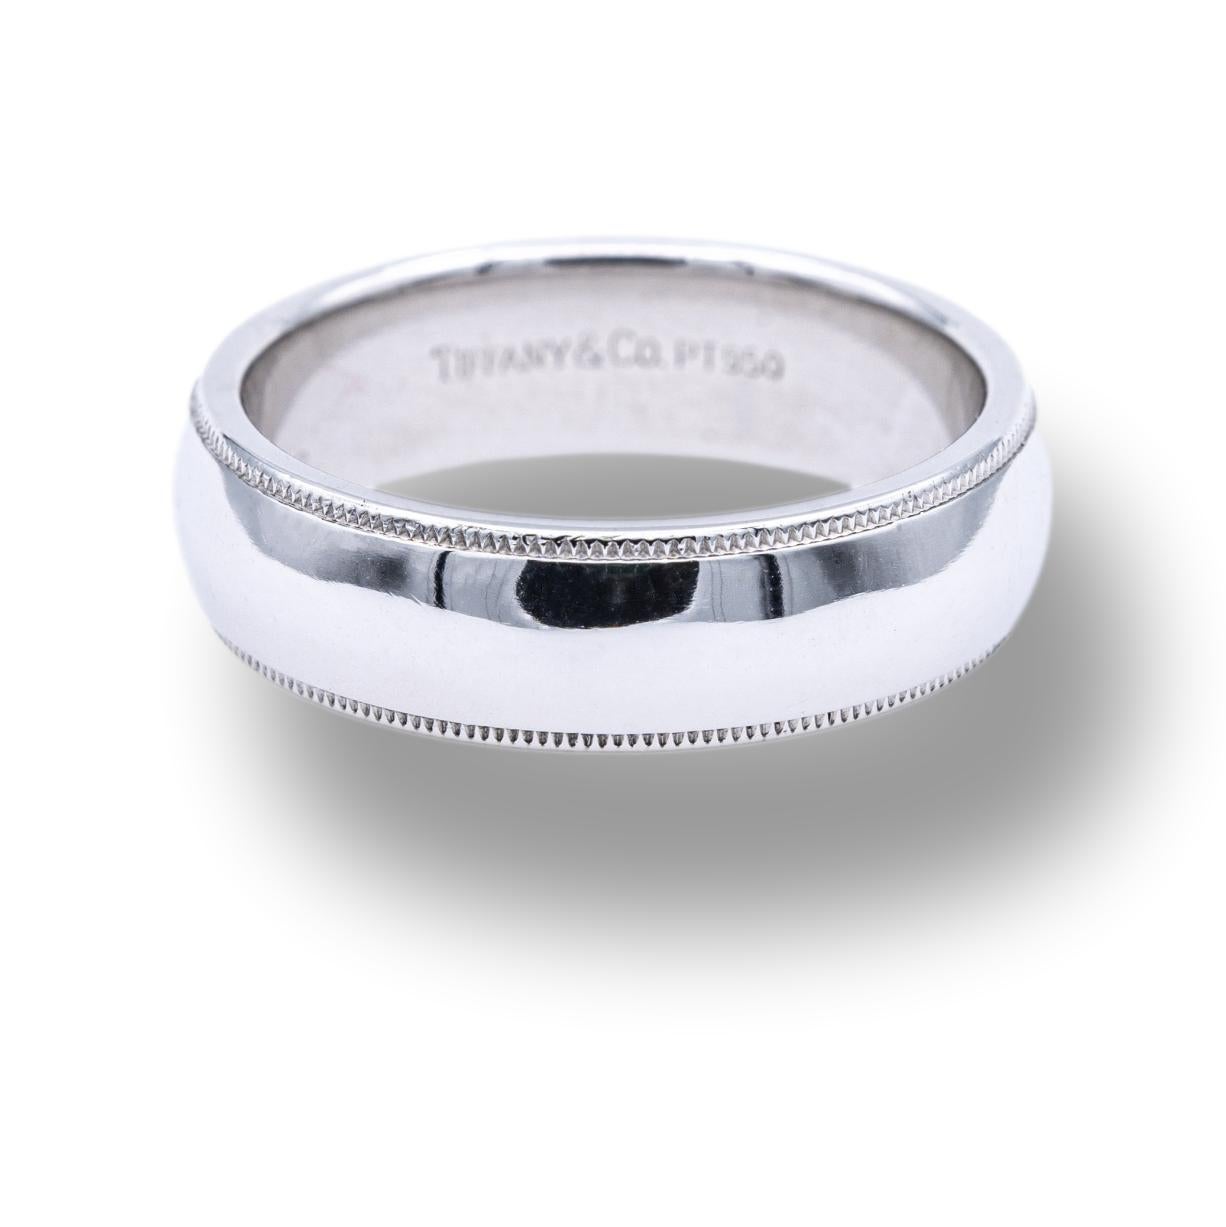 Tiffany & Co Classic Mens wedding band ring finely crafted in platinum with a mill grain edge and high polish finish. The band is comfort fit ,measures 6mm and weighs a hefty 14.3 grams. Size 9

Stamp ©Tiffany & Co. PT950
Size 9
Weight 14.3